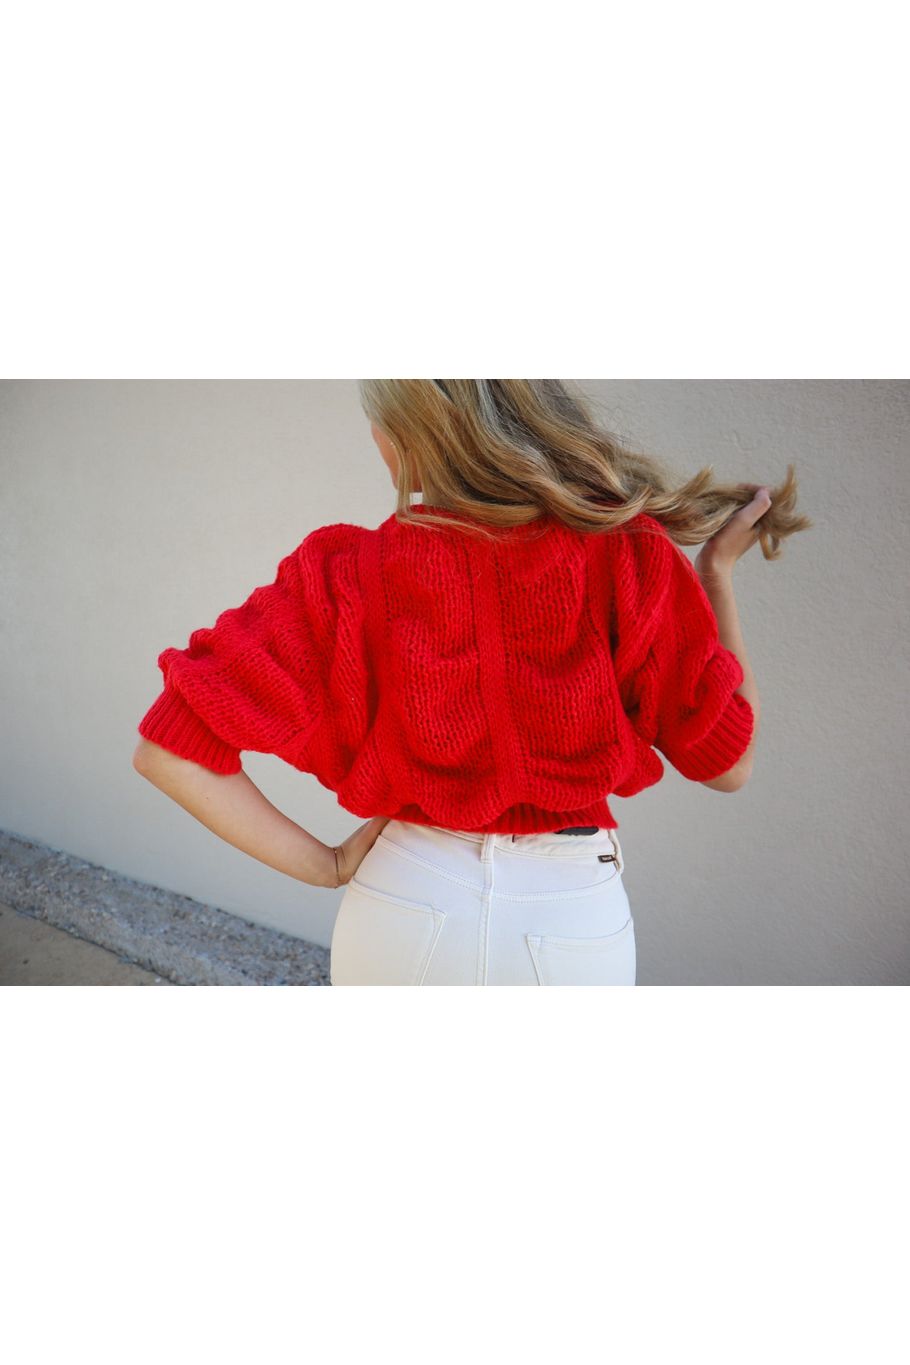 Rosie Red Cropped Knit Sweater Top-Tops-KCoutureBoutique, women's boutique in Bossier City, Louisiana